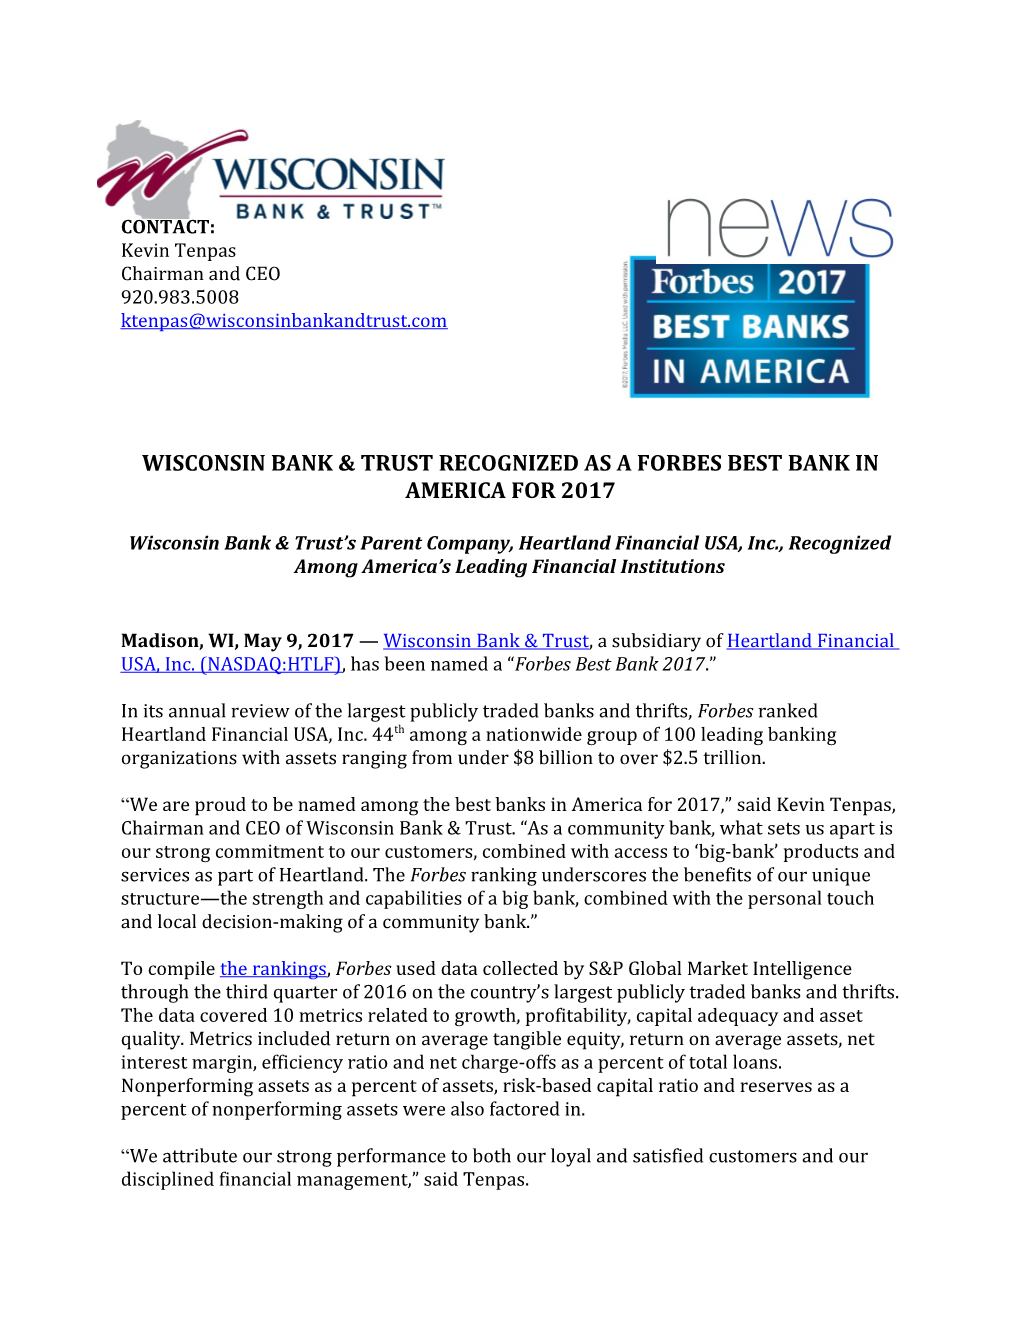 Wisconsin Bank & Trust Recognized As a Forbes Best Bank in America for 2017